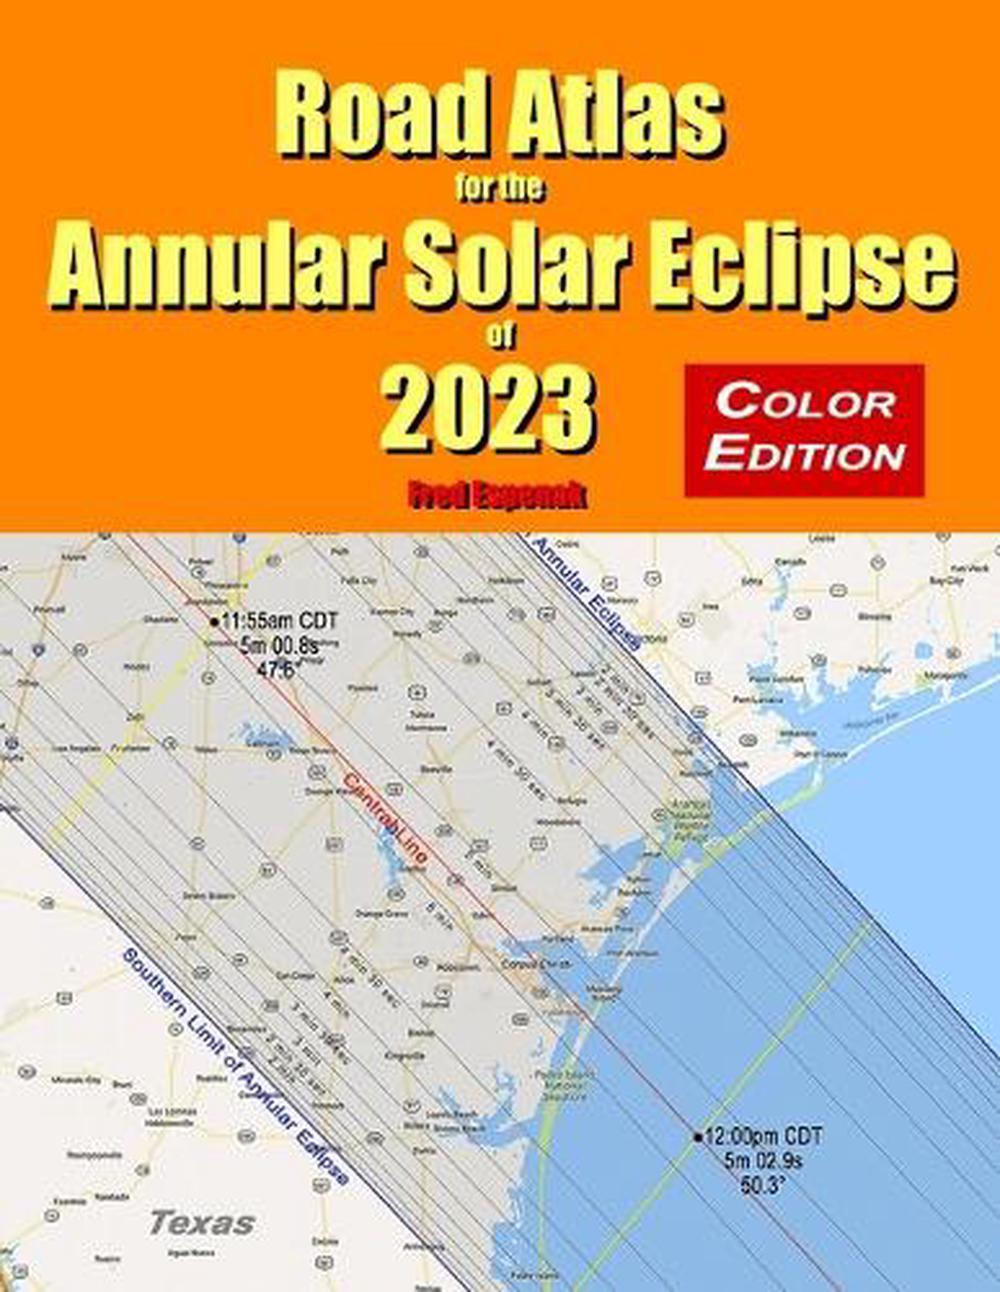 Road Atlas for the Annular Solar Eclipse of 2023 Color Edition by